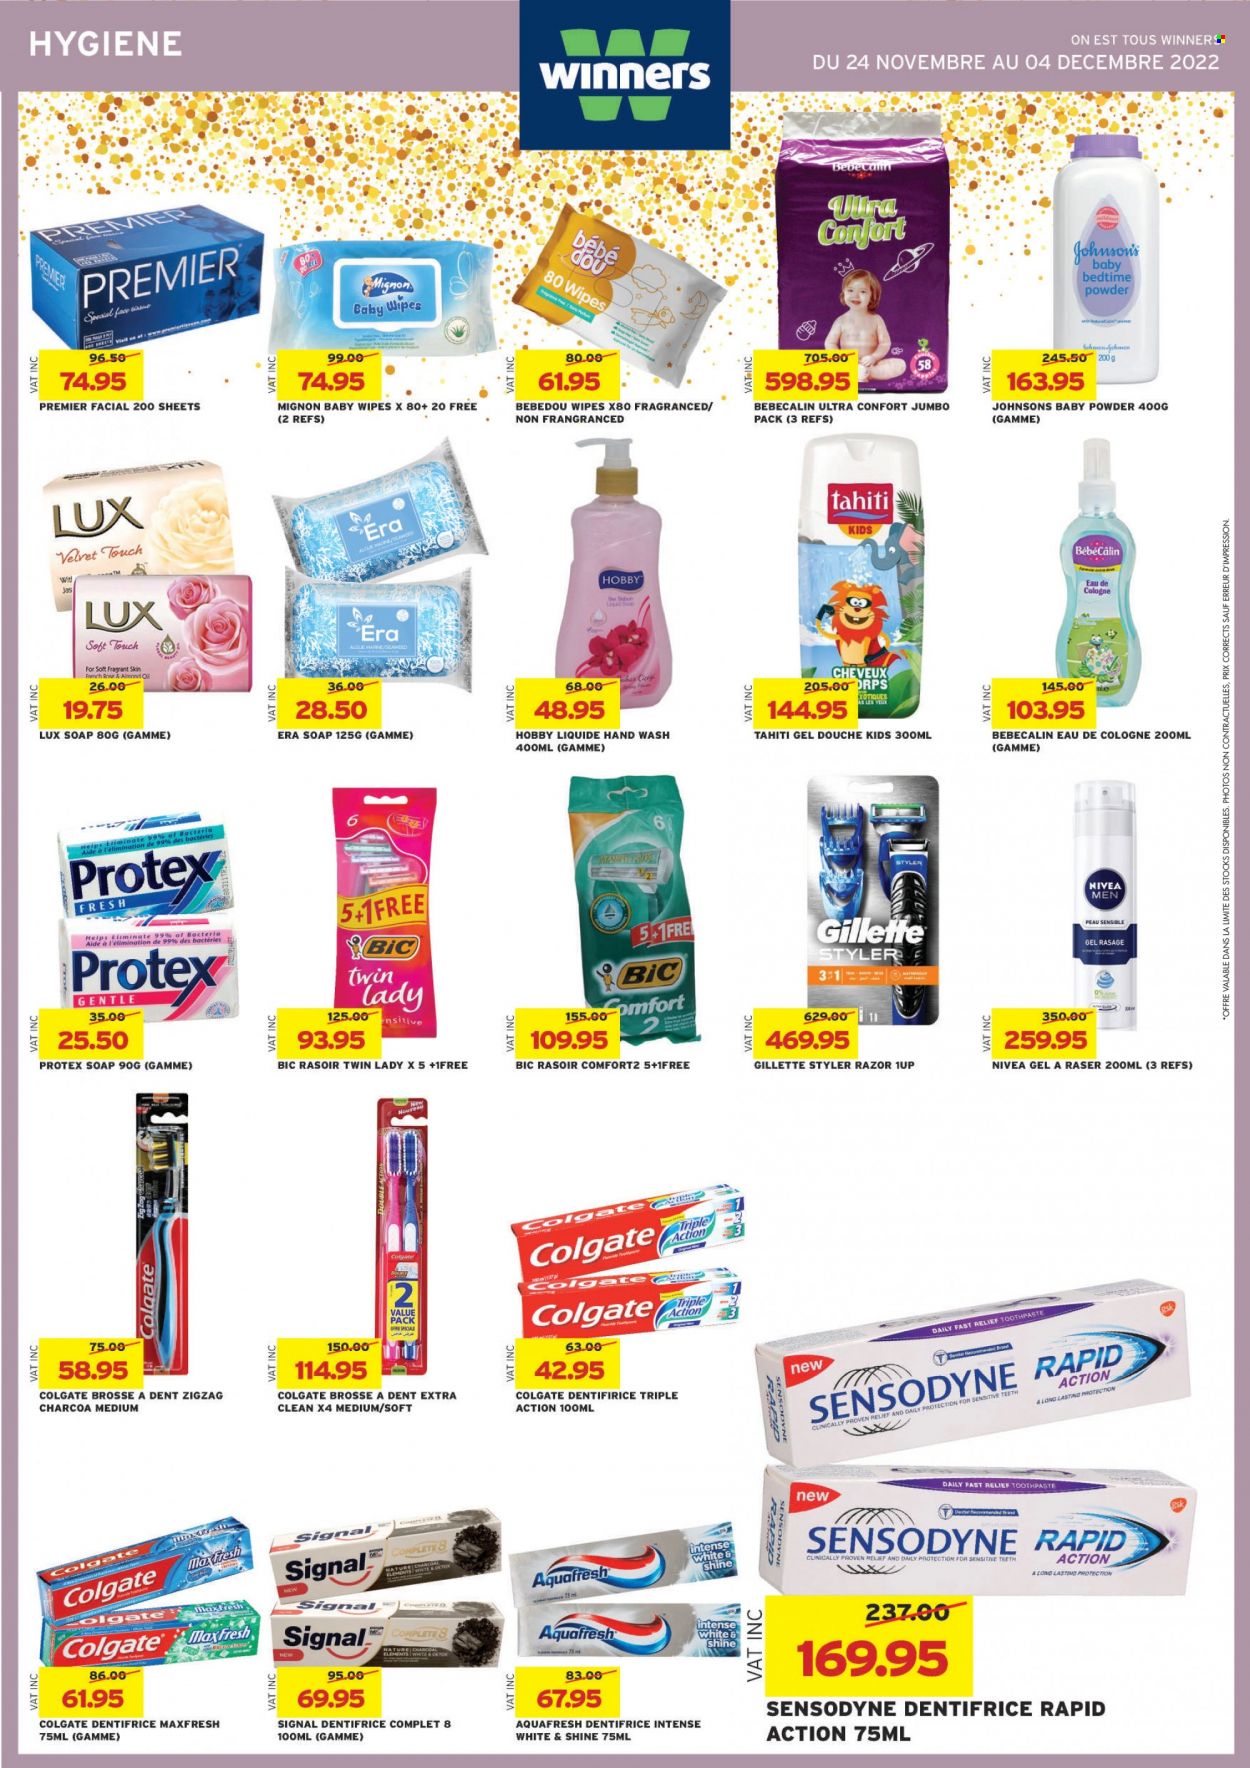 thumbnail - Winner's Catalogue - 24.11.2022 - 4.12.2022 - Sales products - seaweed, oil, wine, rosé wine, wipes, baby wipes, Johnson's, Nivea, baby powder, tissues, Lux, hand soap, hand wash, Protex, soap, toothpaste, Signal, Gillette, cologne, BIC, razor, Colgate, Sensodyne. Page 34.